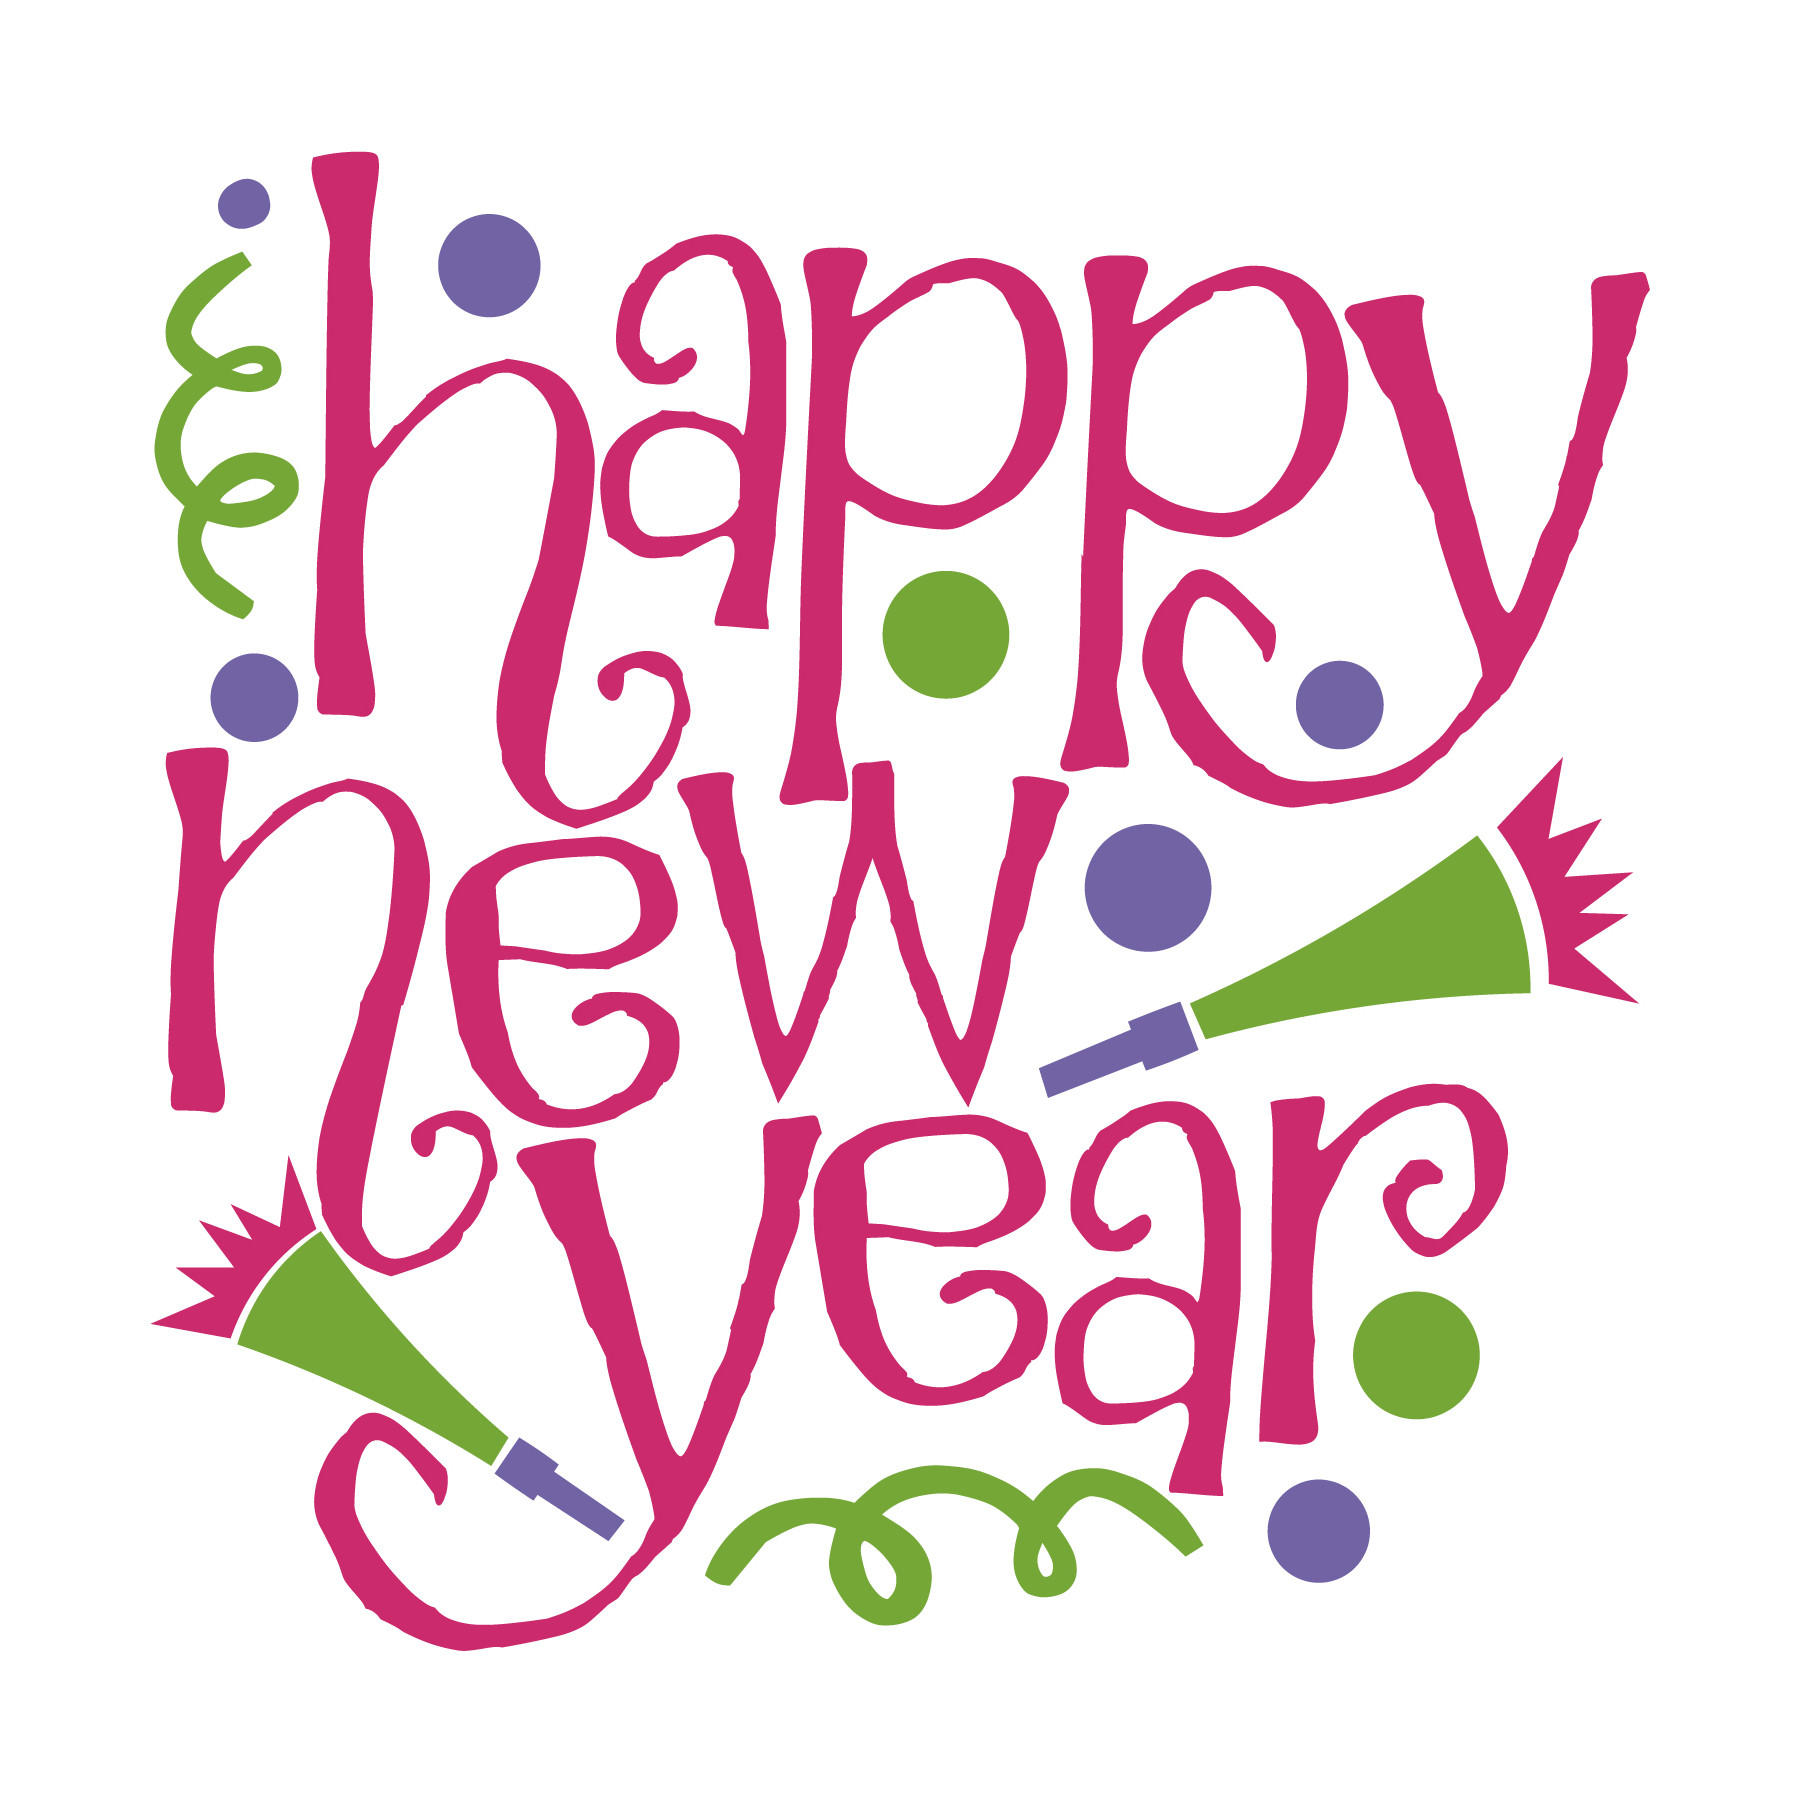 new year wishes clipart - photo #11